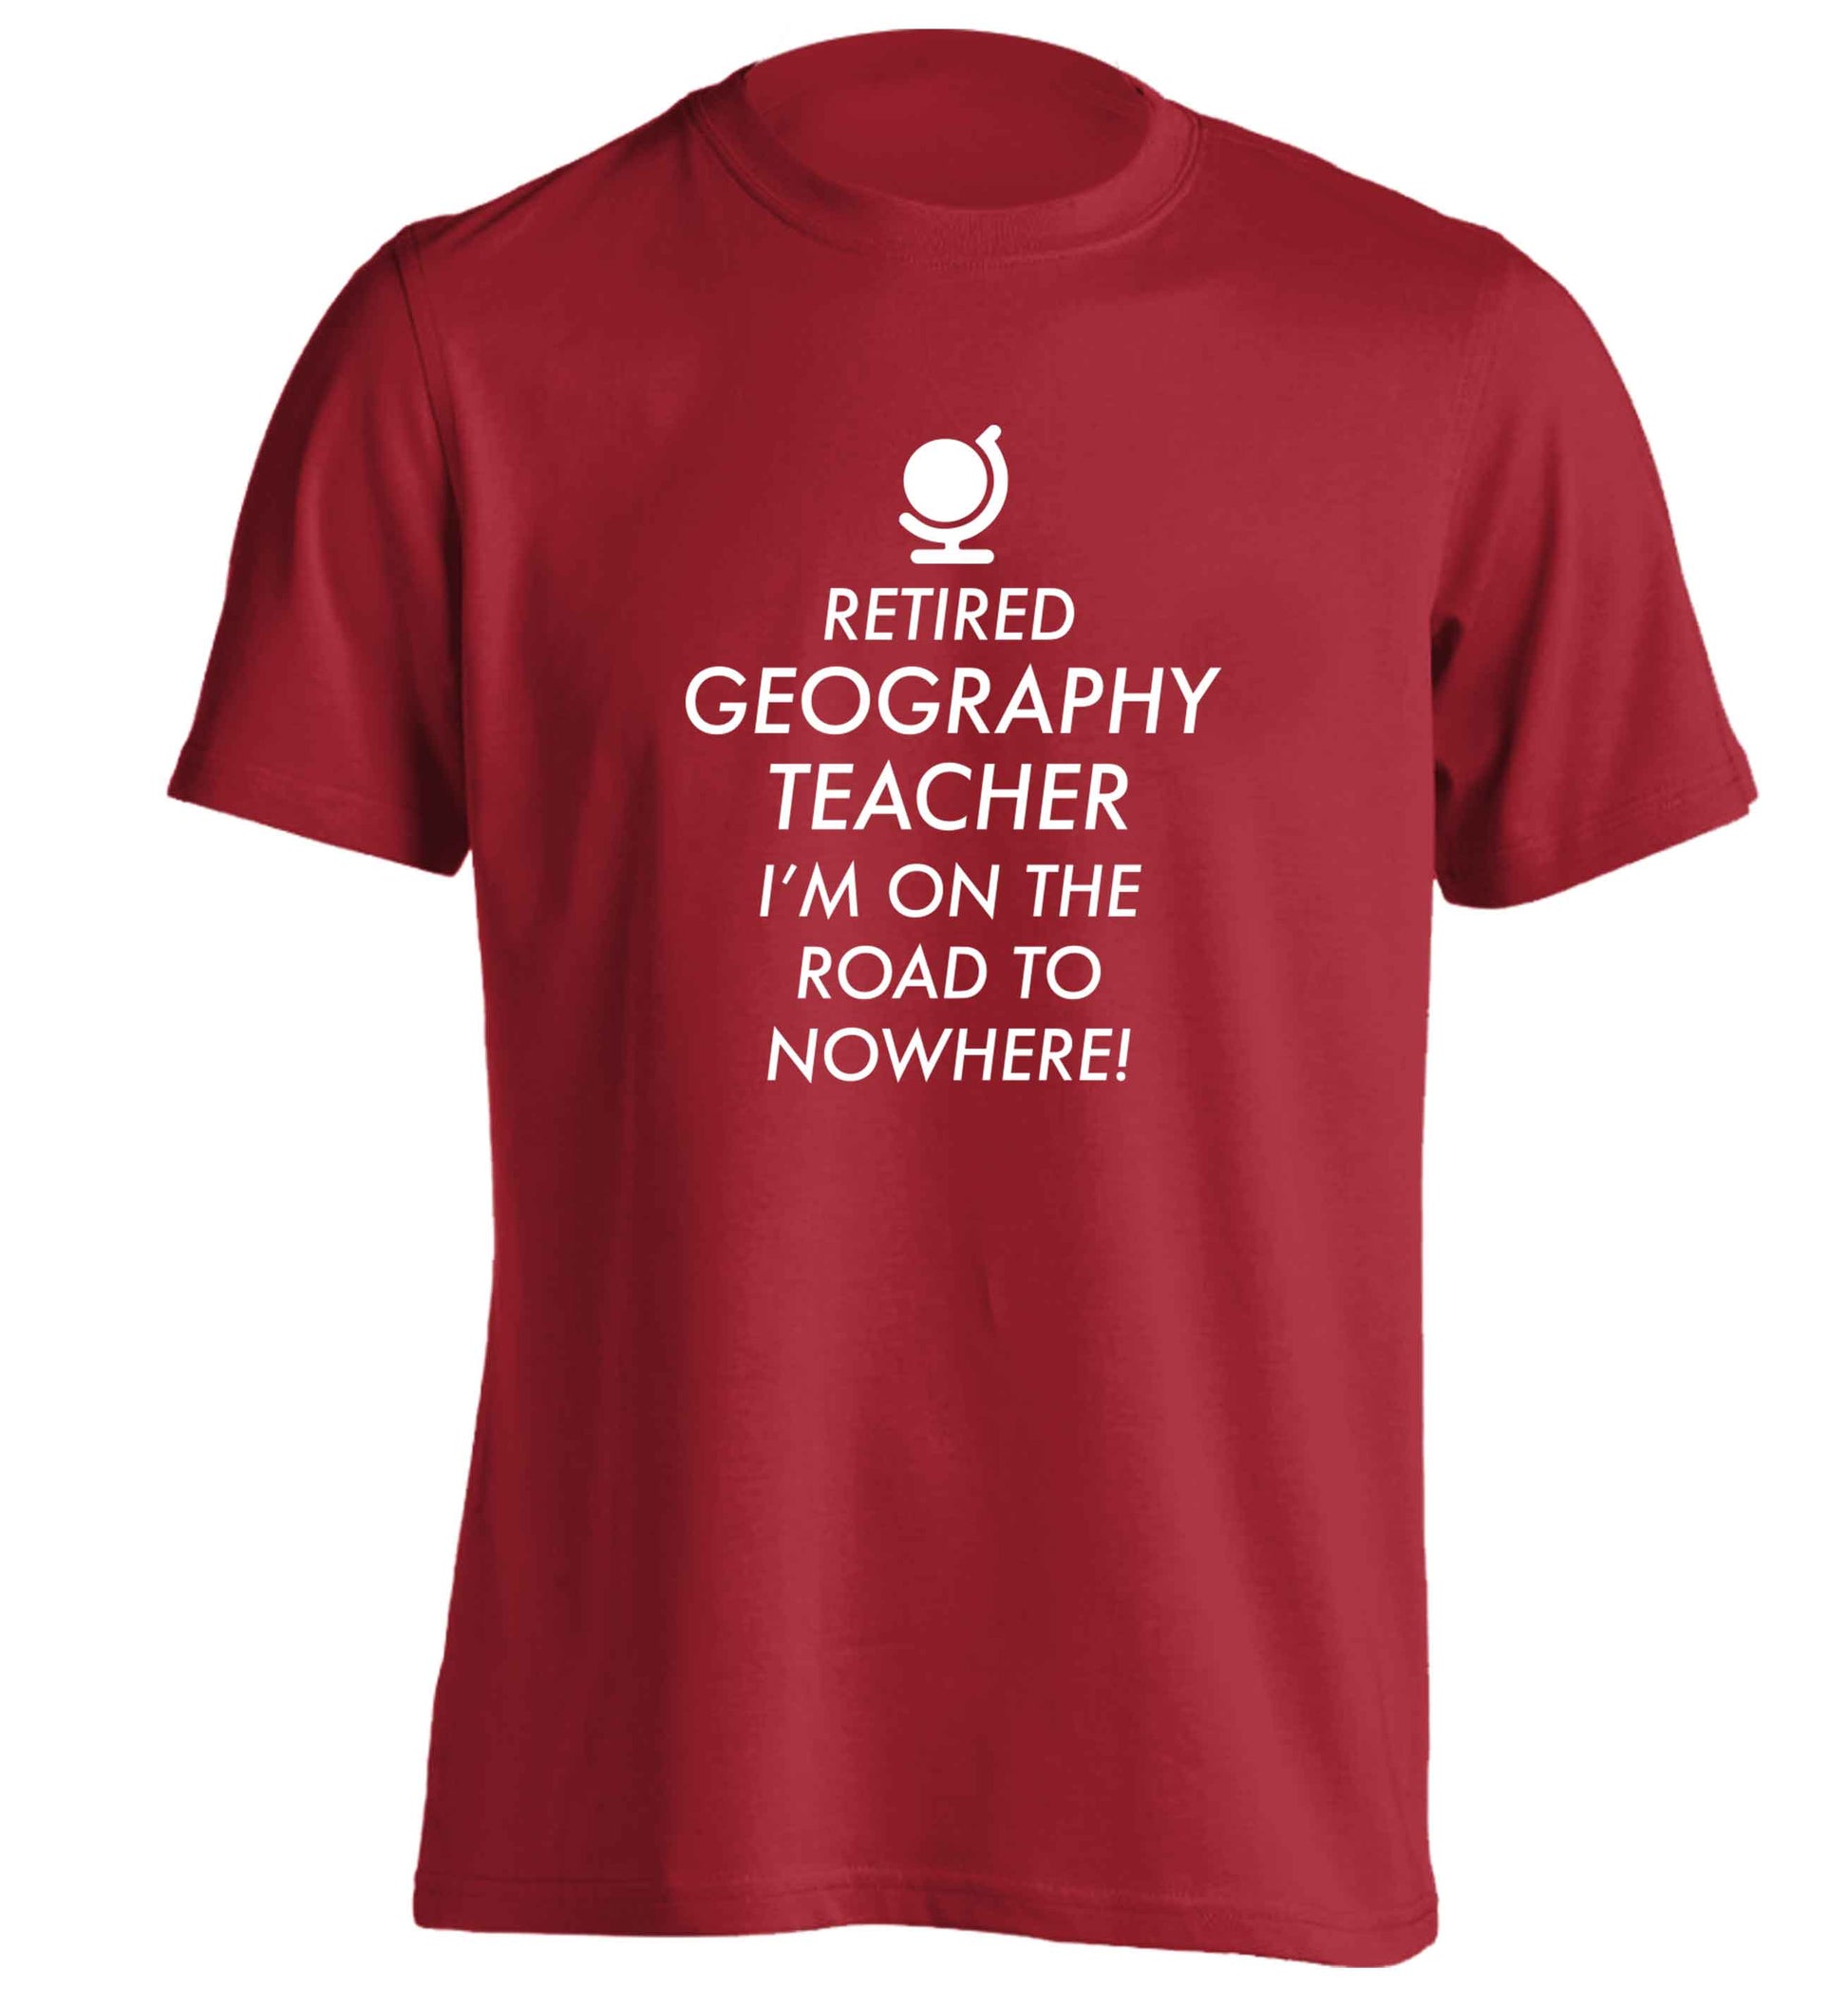 Retired geography teacher I'm on the road to nowhere adults unisex red Tshirt 2XL